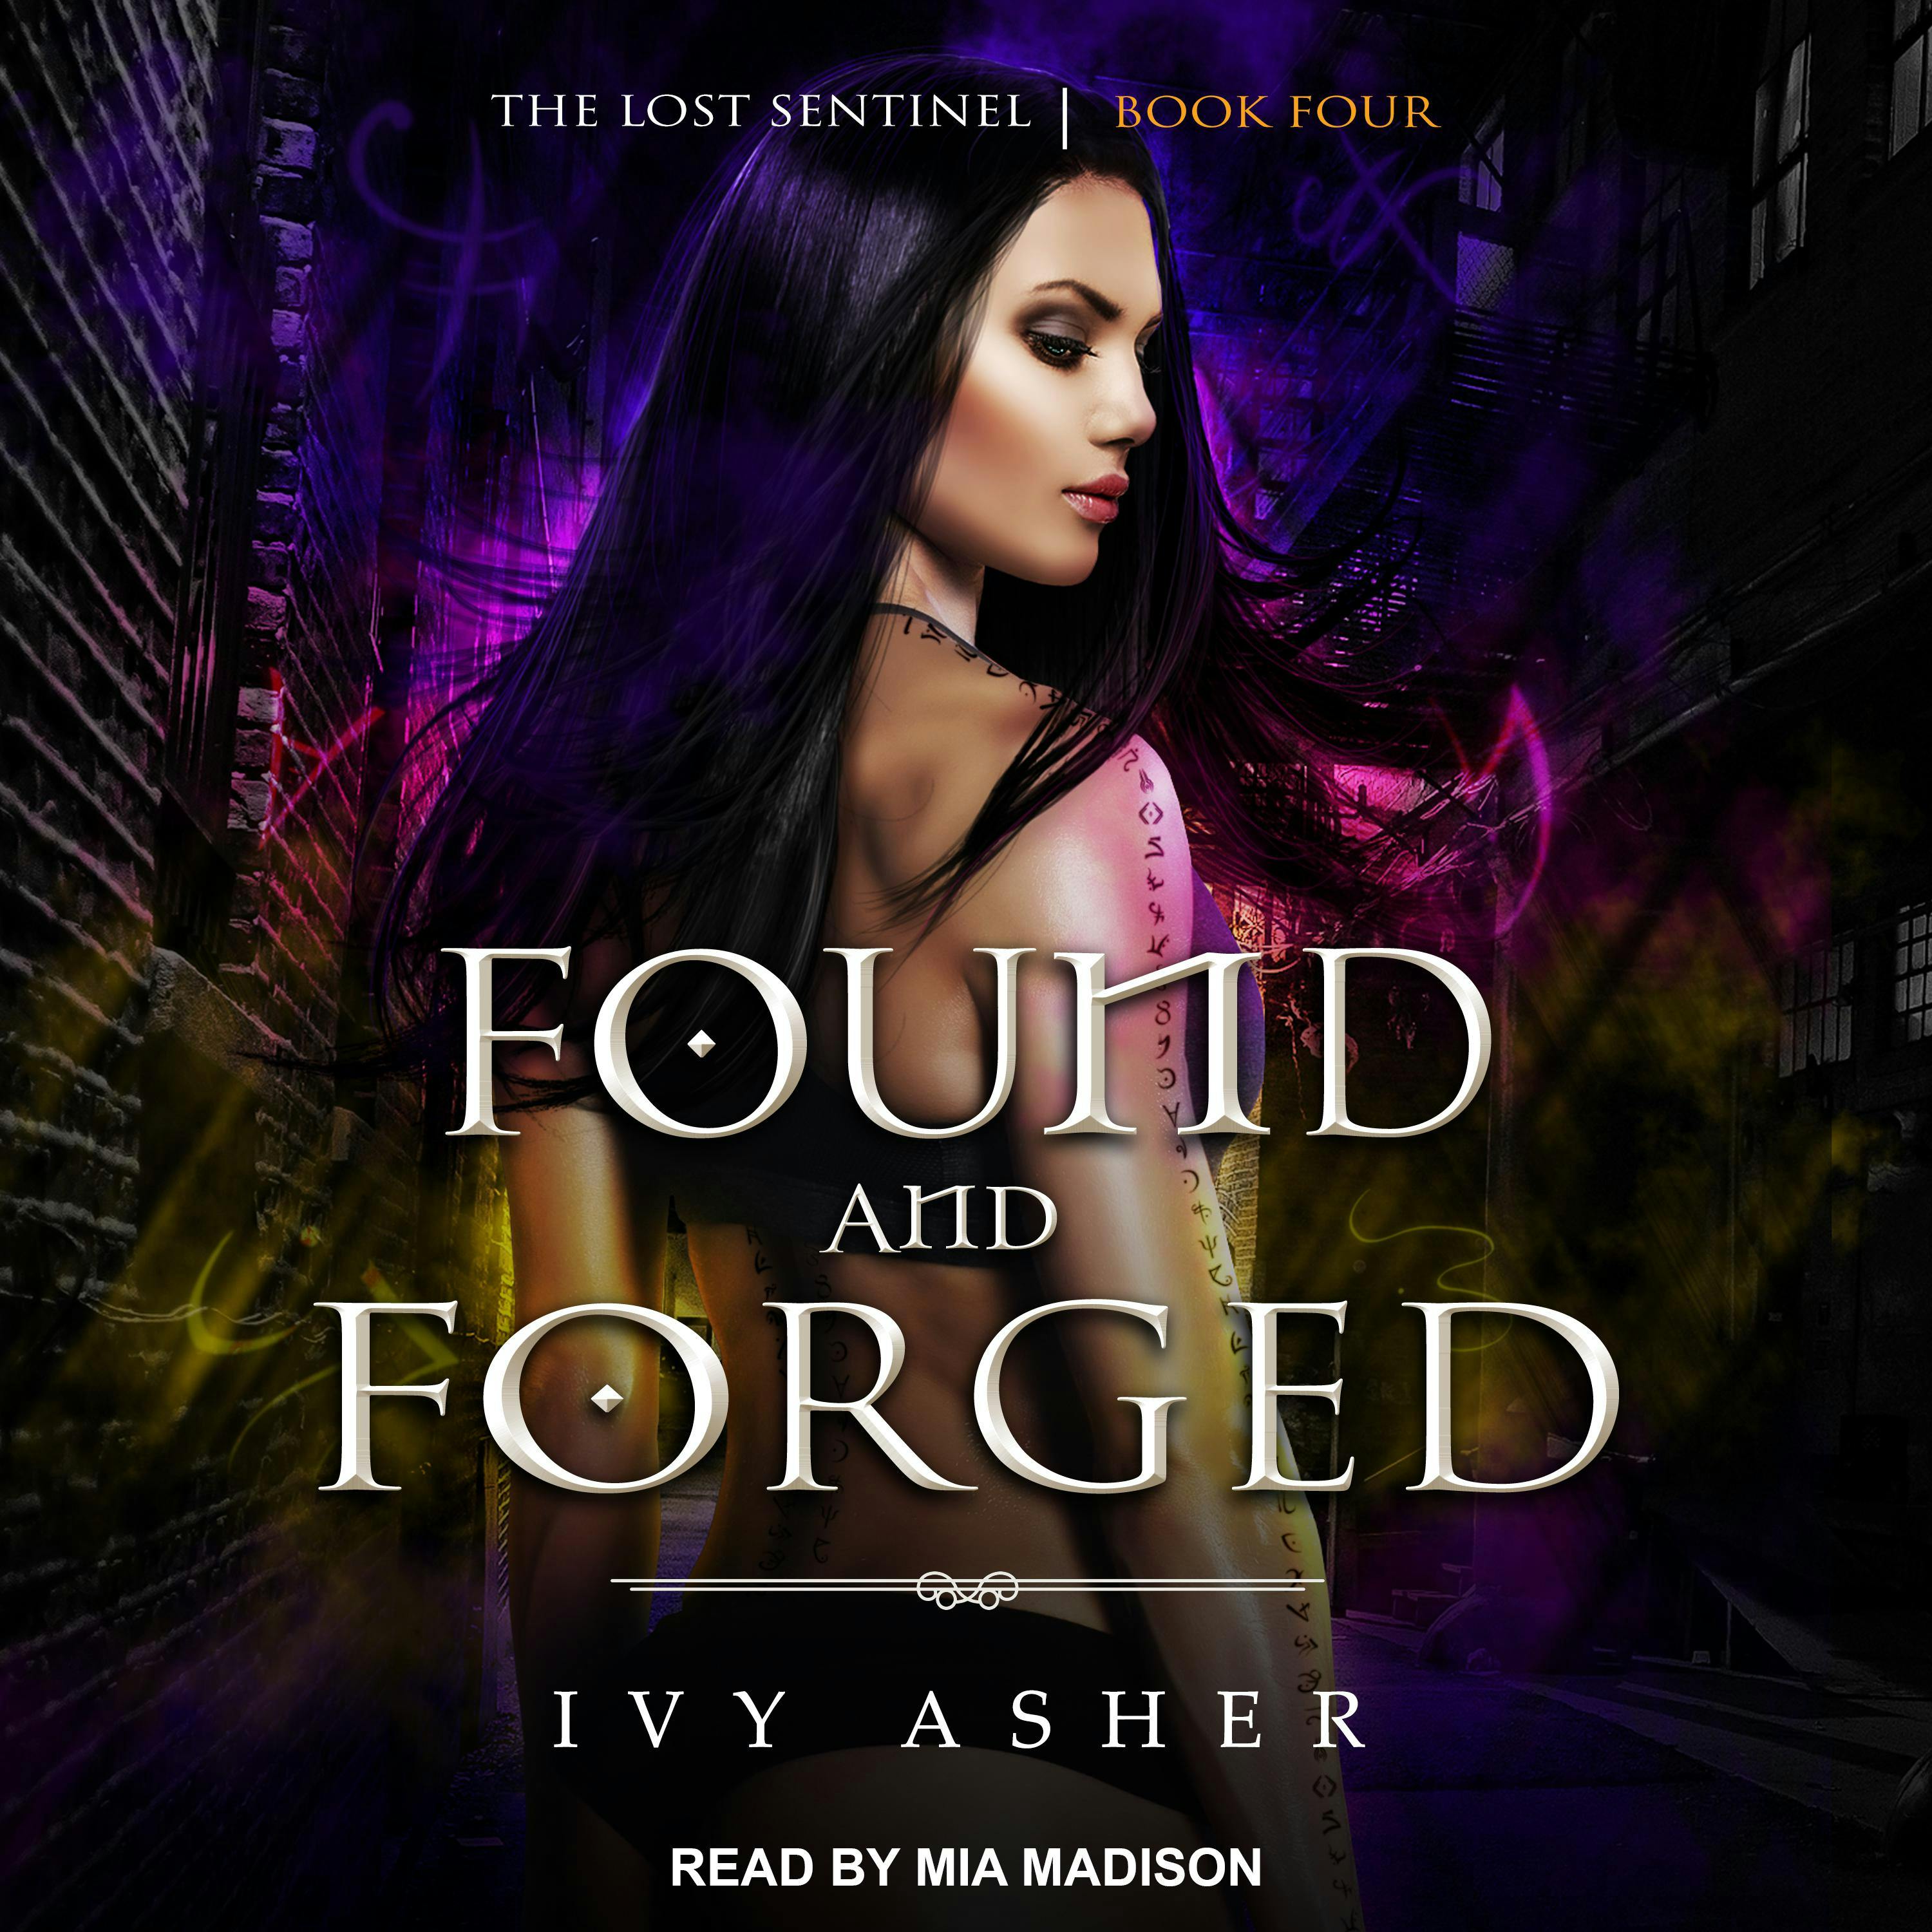 Found and Forged: The Lost Sentinel Book Four - undefined